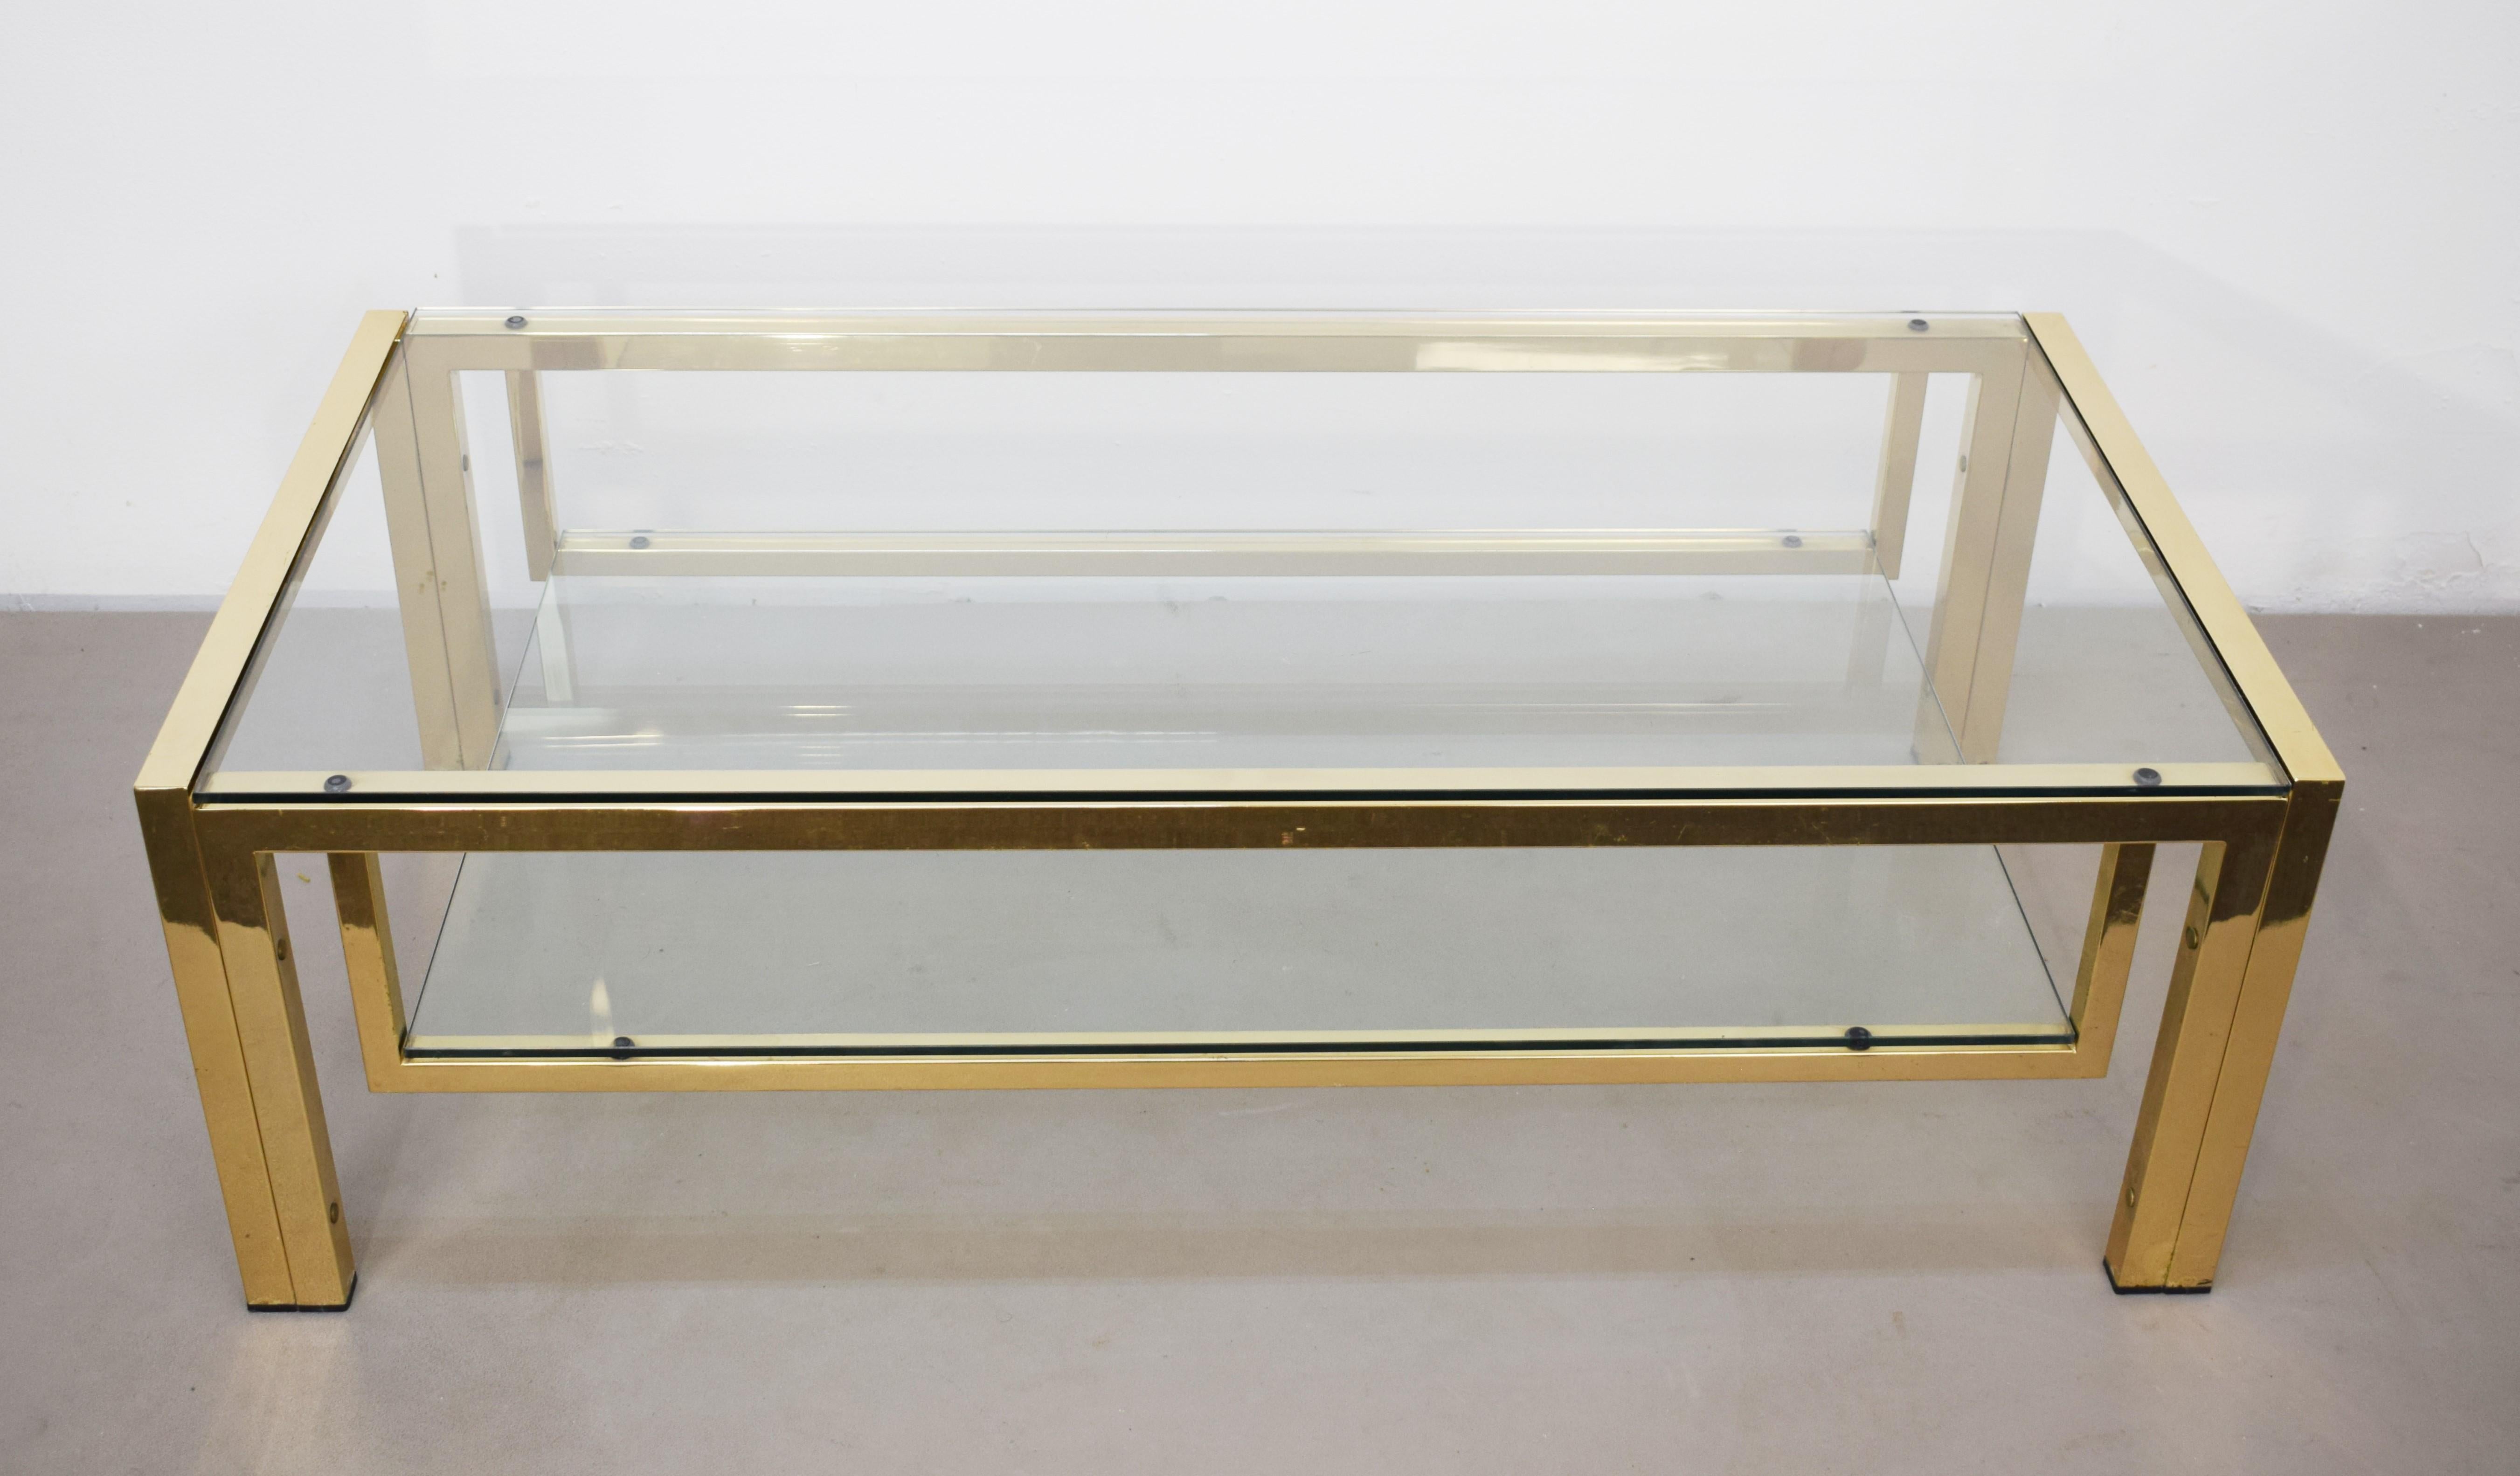 Italian coffee table, golden metal and glass, 1970s.
Dimensions: H= 39 cm; W= 120 cm; D= 60 cm.